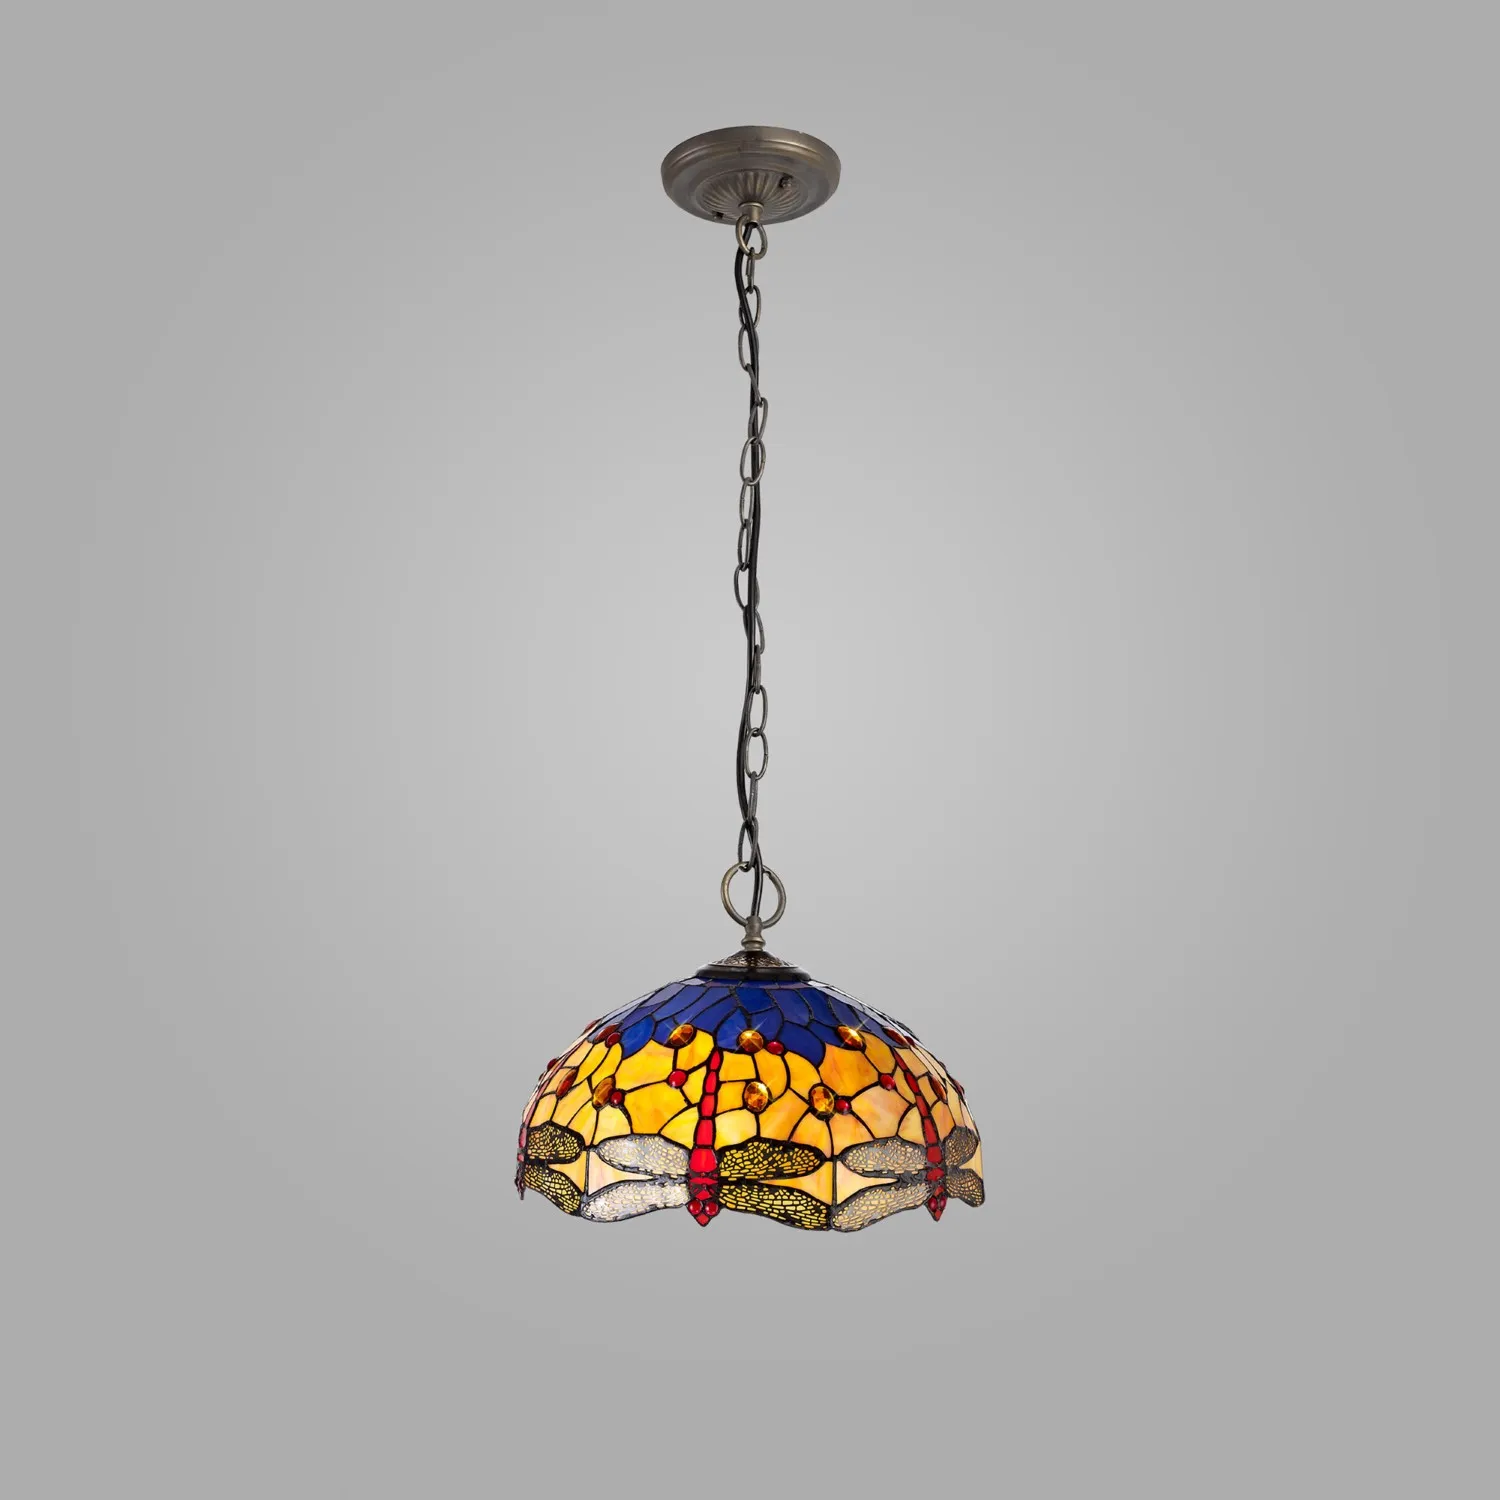 Hitchin 3 Light Downlighter Pendant E27 With 40cm Tiffany Shade, Blue Orange Crystal Aged Antique Brass